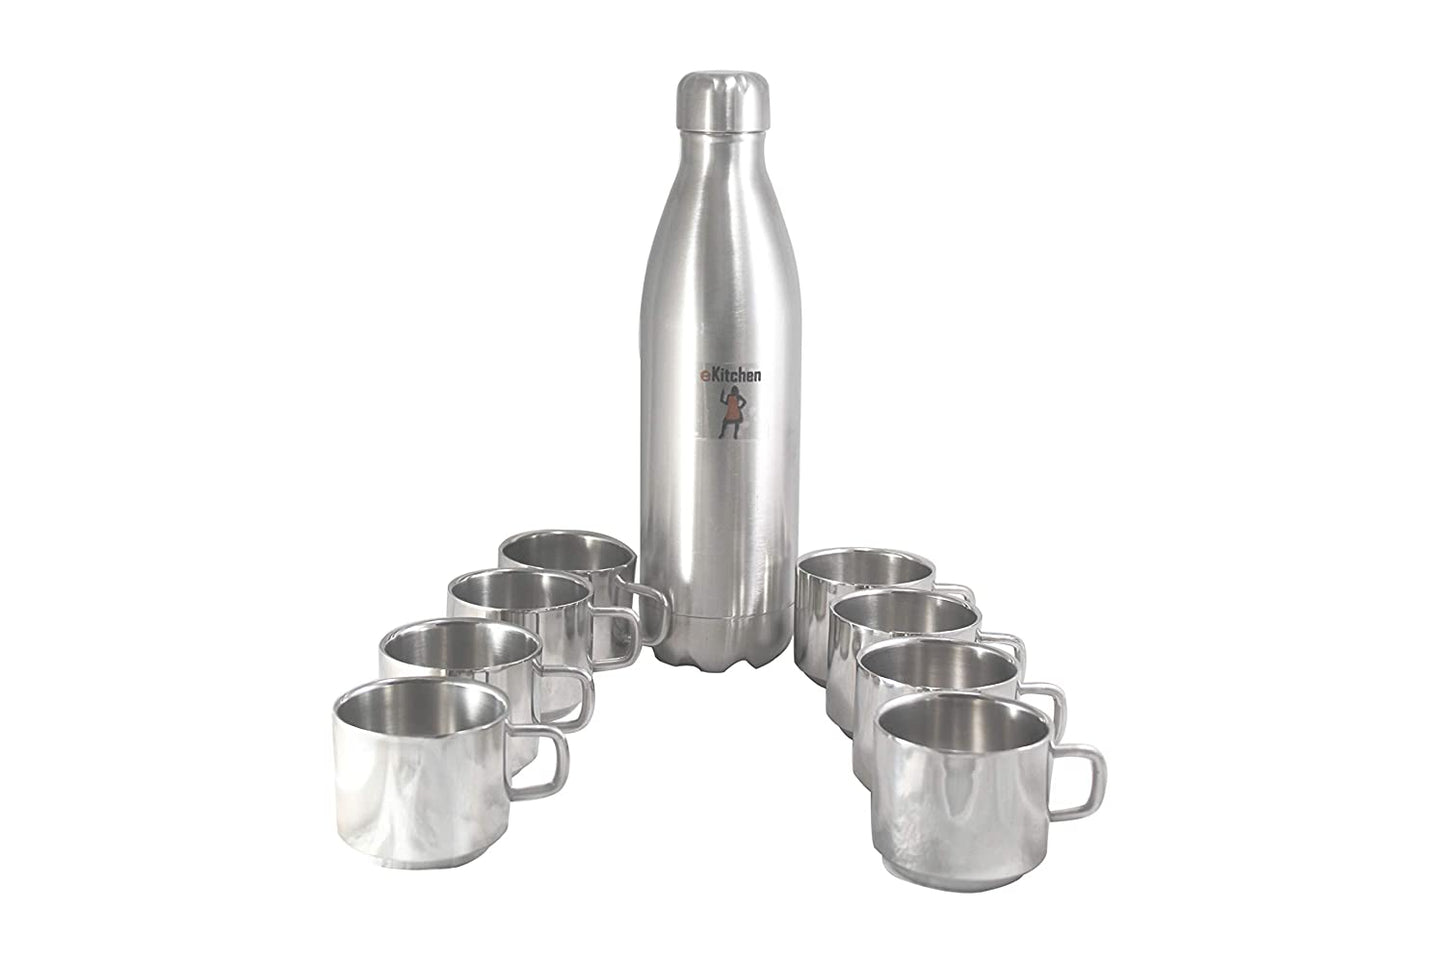 Stainless Steel 1000ml Hot and Cold Water Bottle | Flask + 120ml Cups | Mugs Set Of 8 Pcs